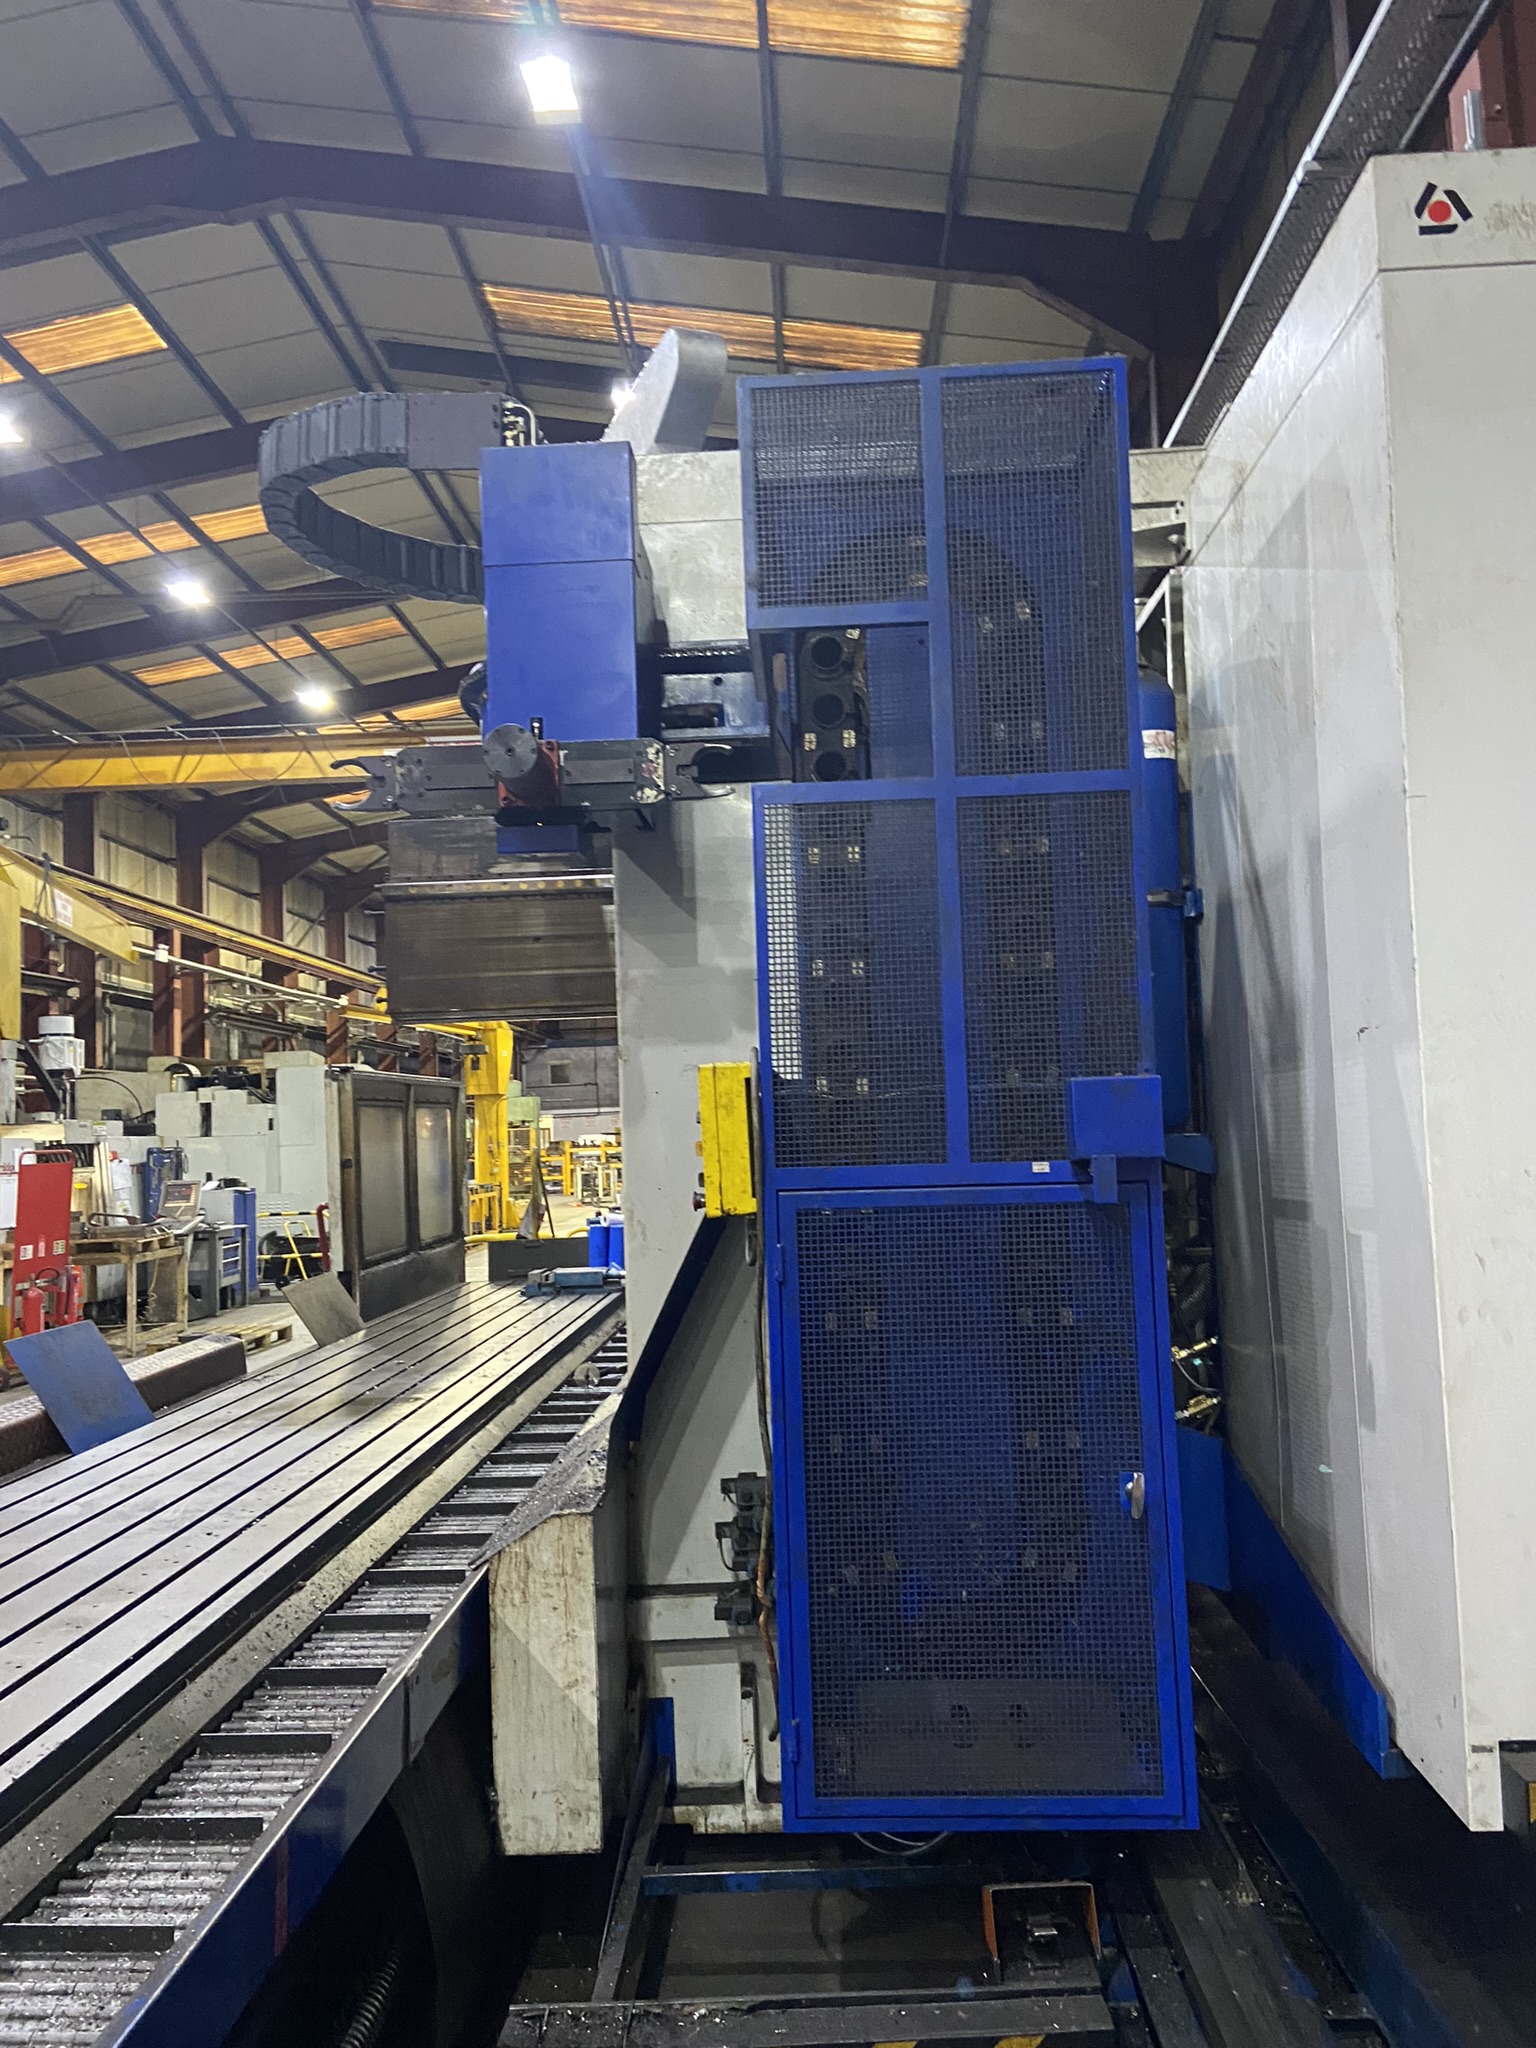 USED SORALUCE SP1000 Travelling Column Table Type Milling Machine – TWW Cat 7974